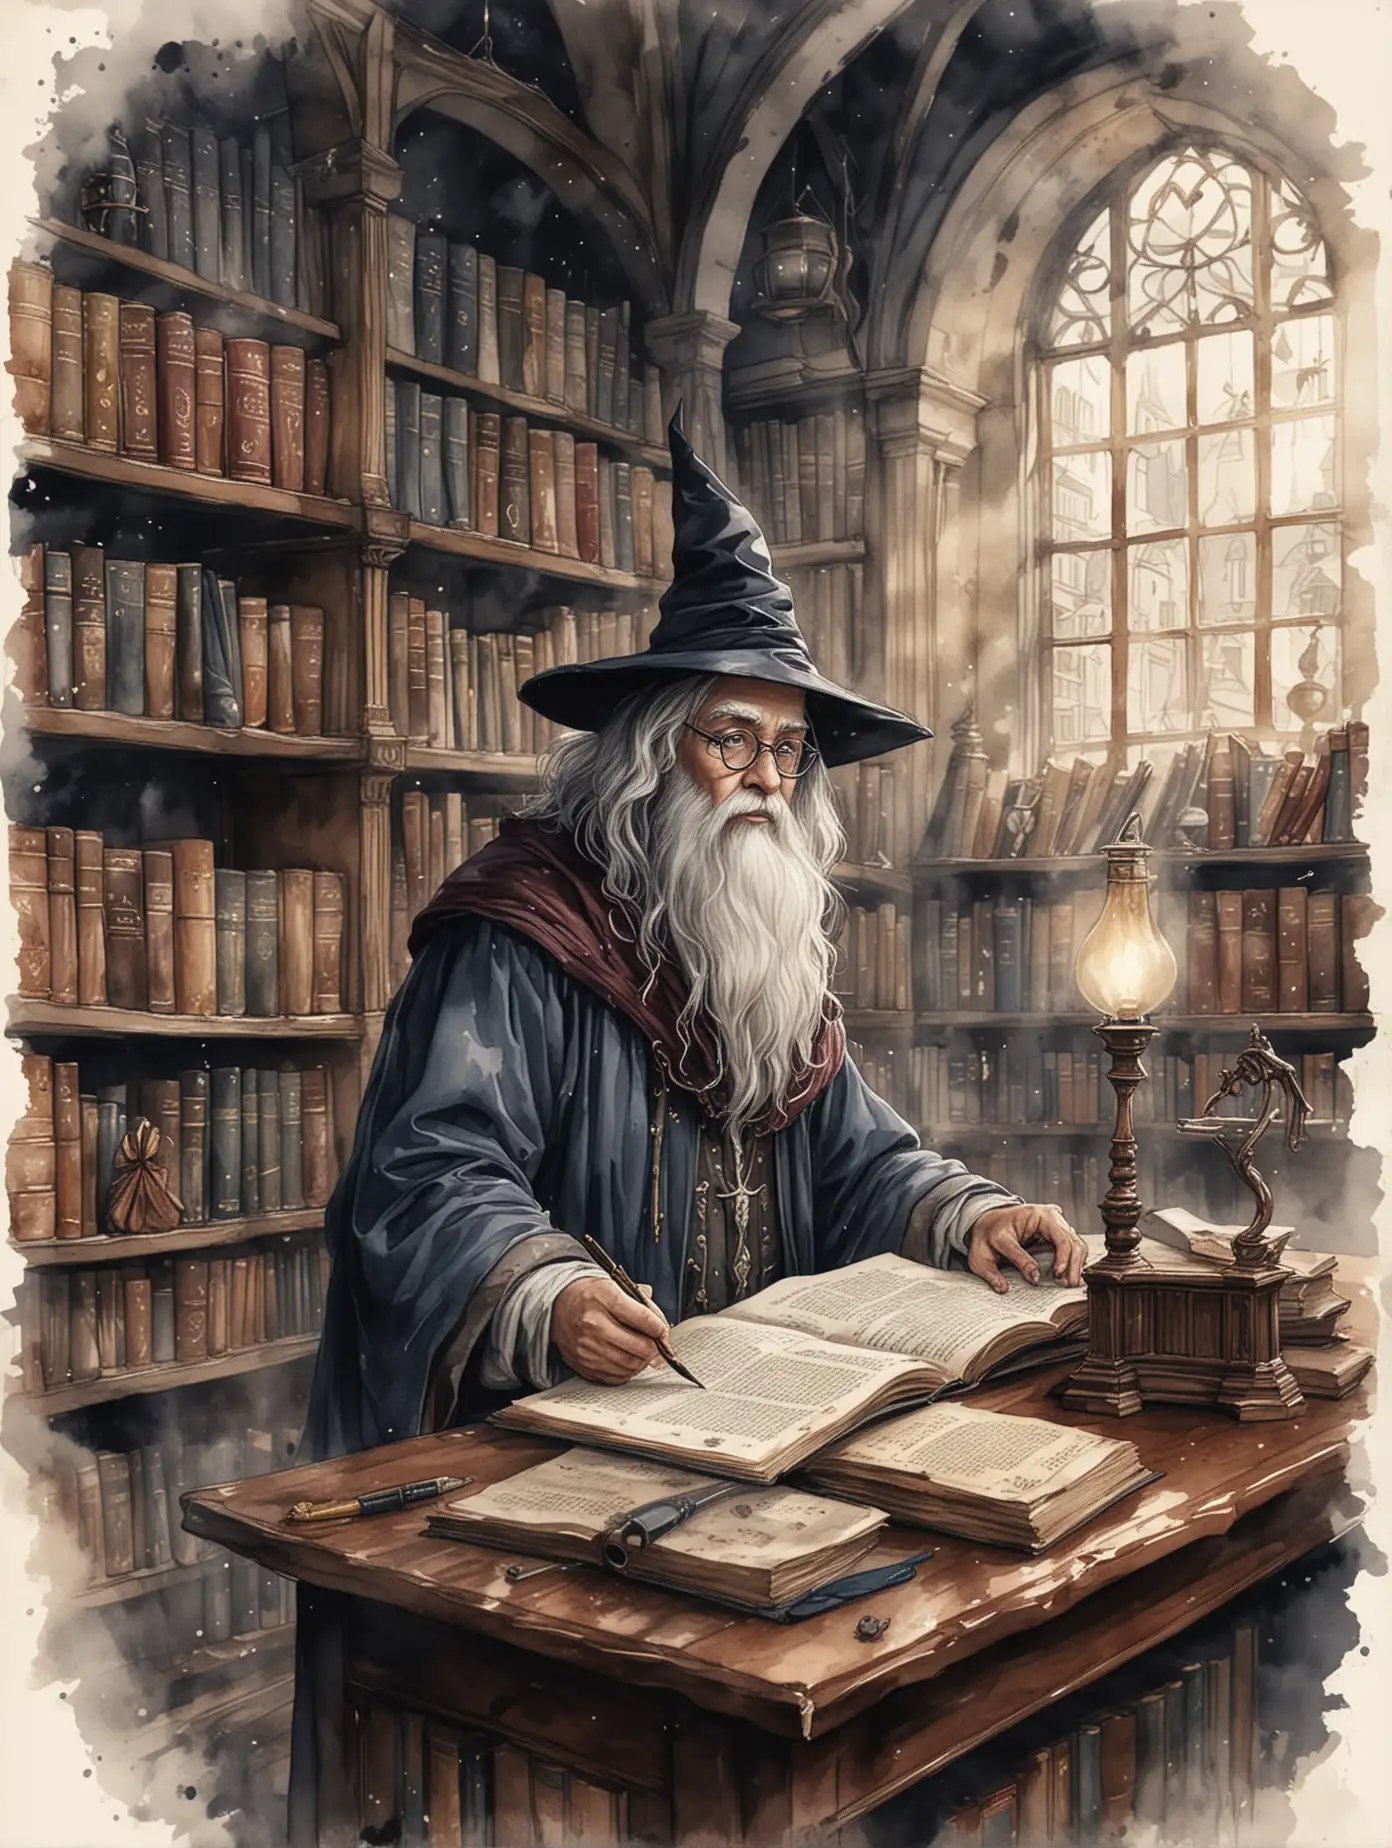 Dark Academia Students Studying in a Wizard Library Graphic Art Illustration